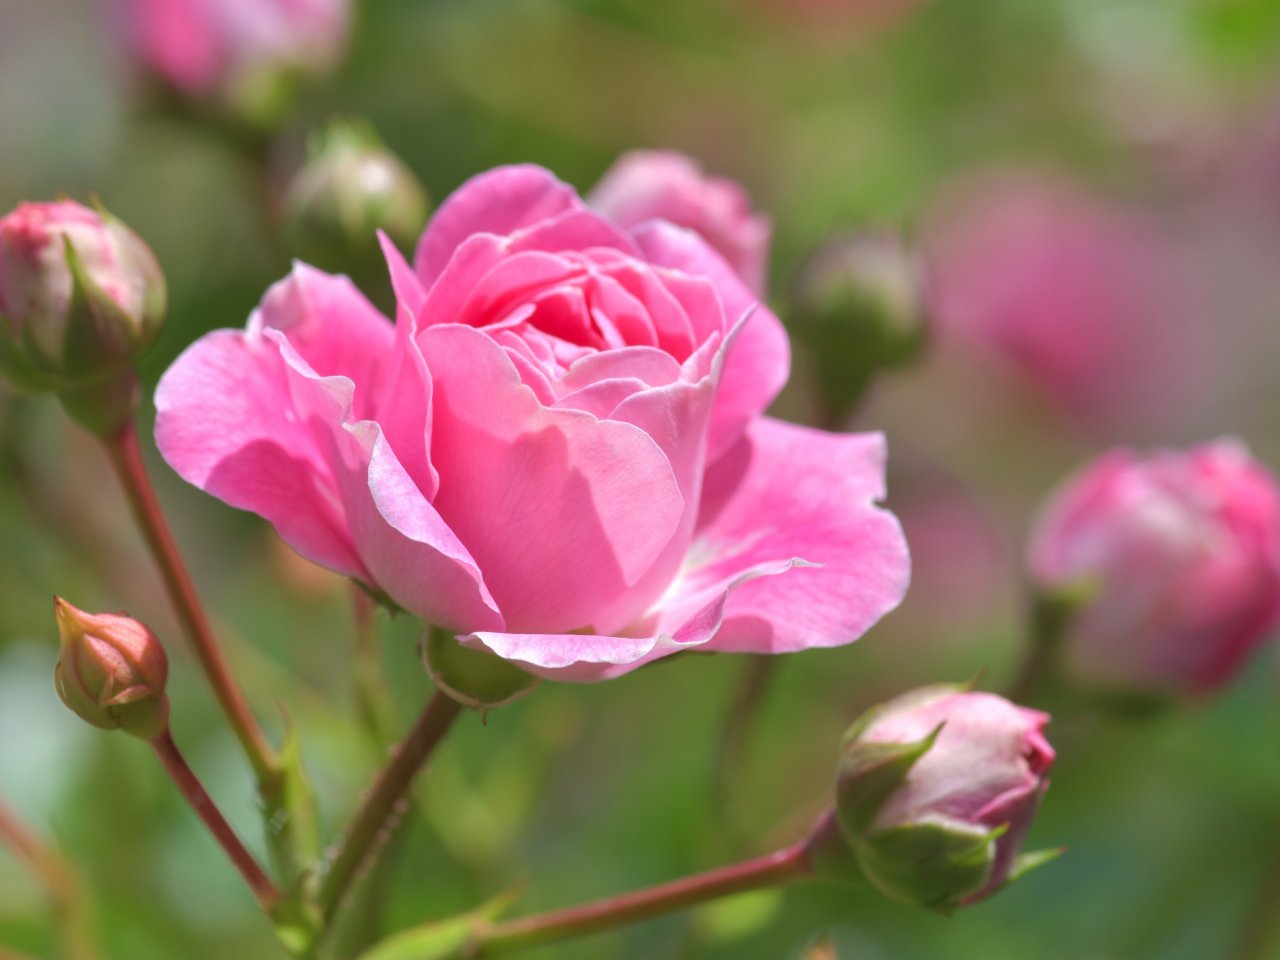 Pink Rose Blossom jigsaw puzzle